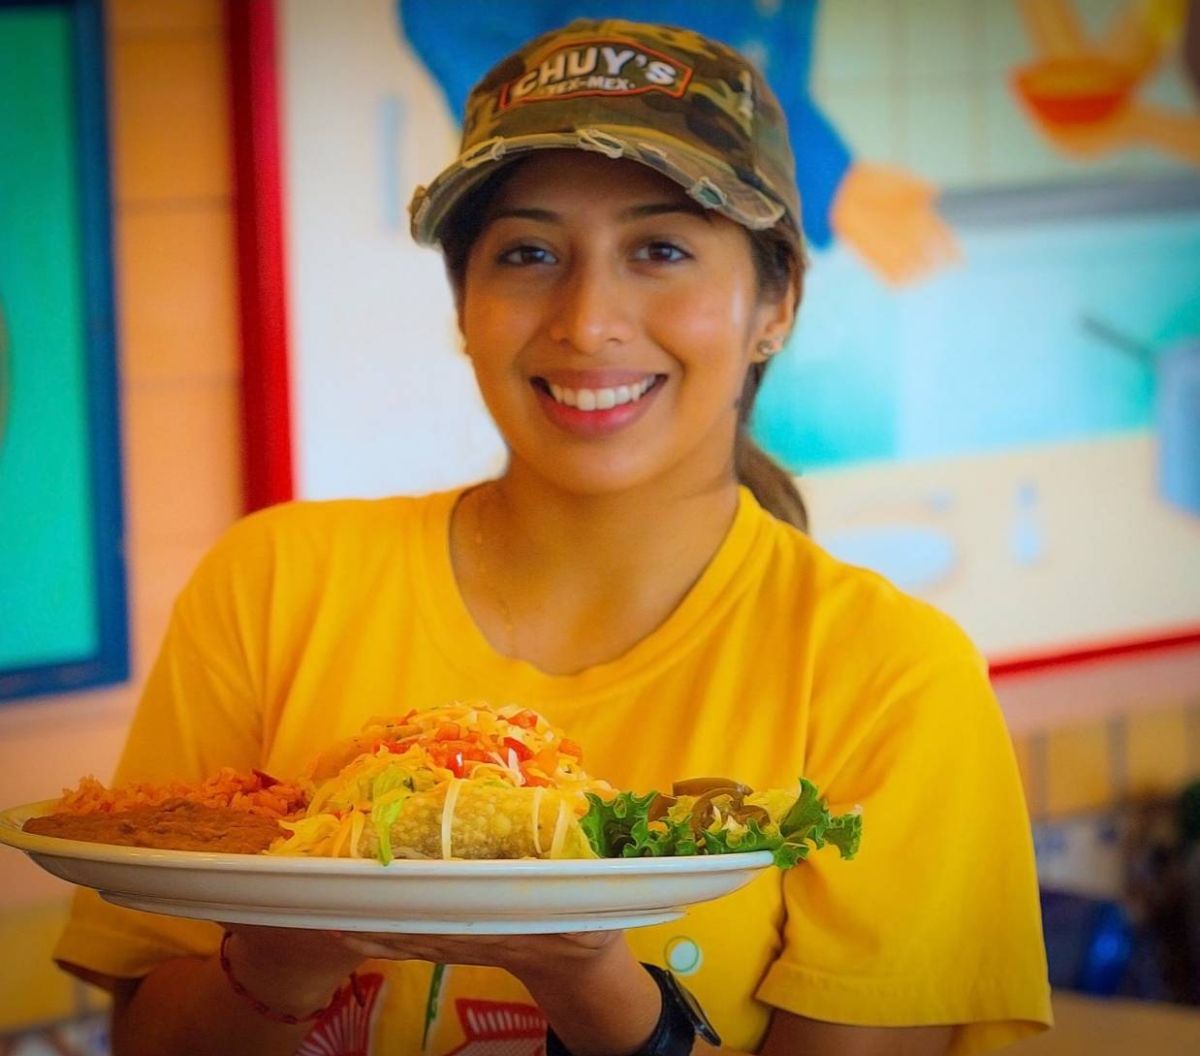 A Chuy’s employee holds a plate of tacos while wearing a Chuy’s camo hat and a yellow t-shirt.